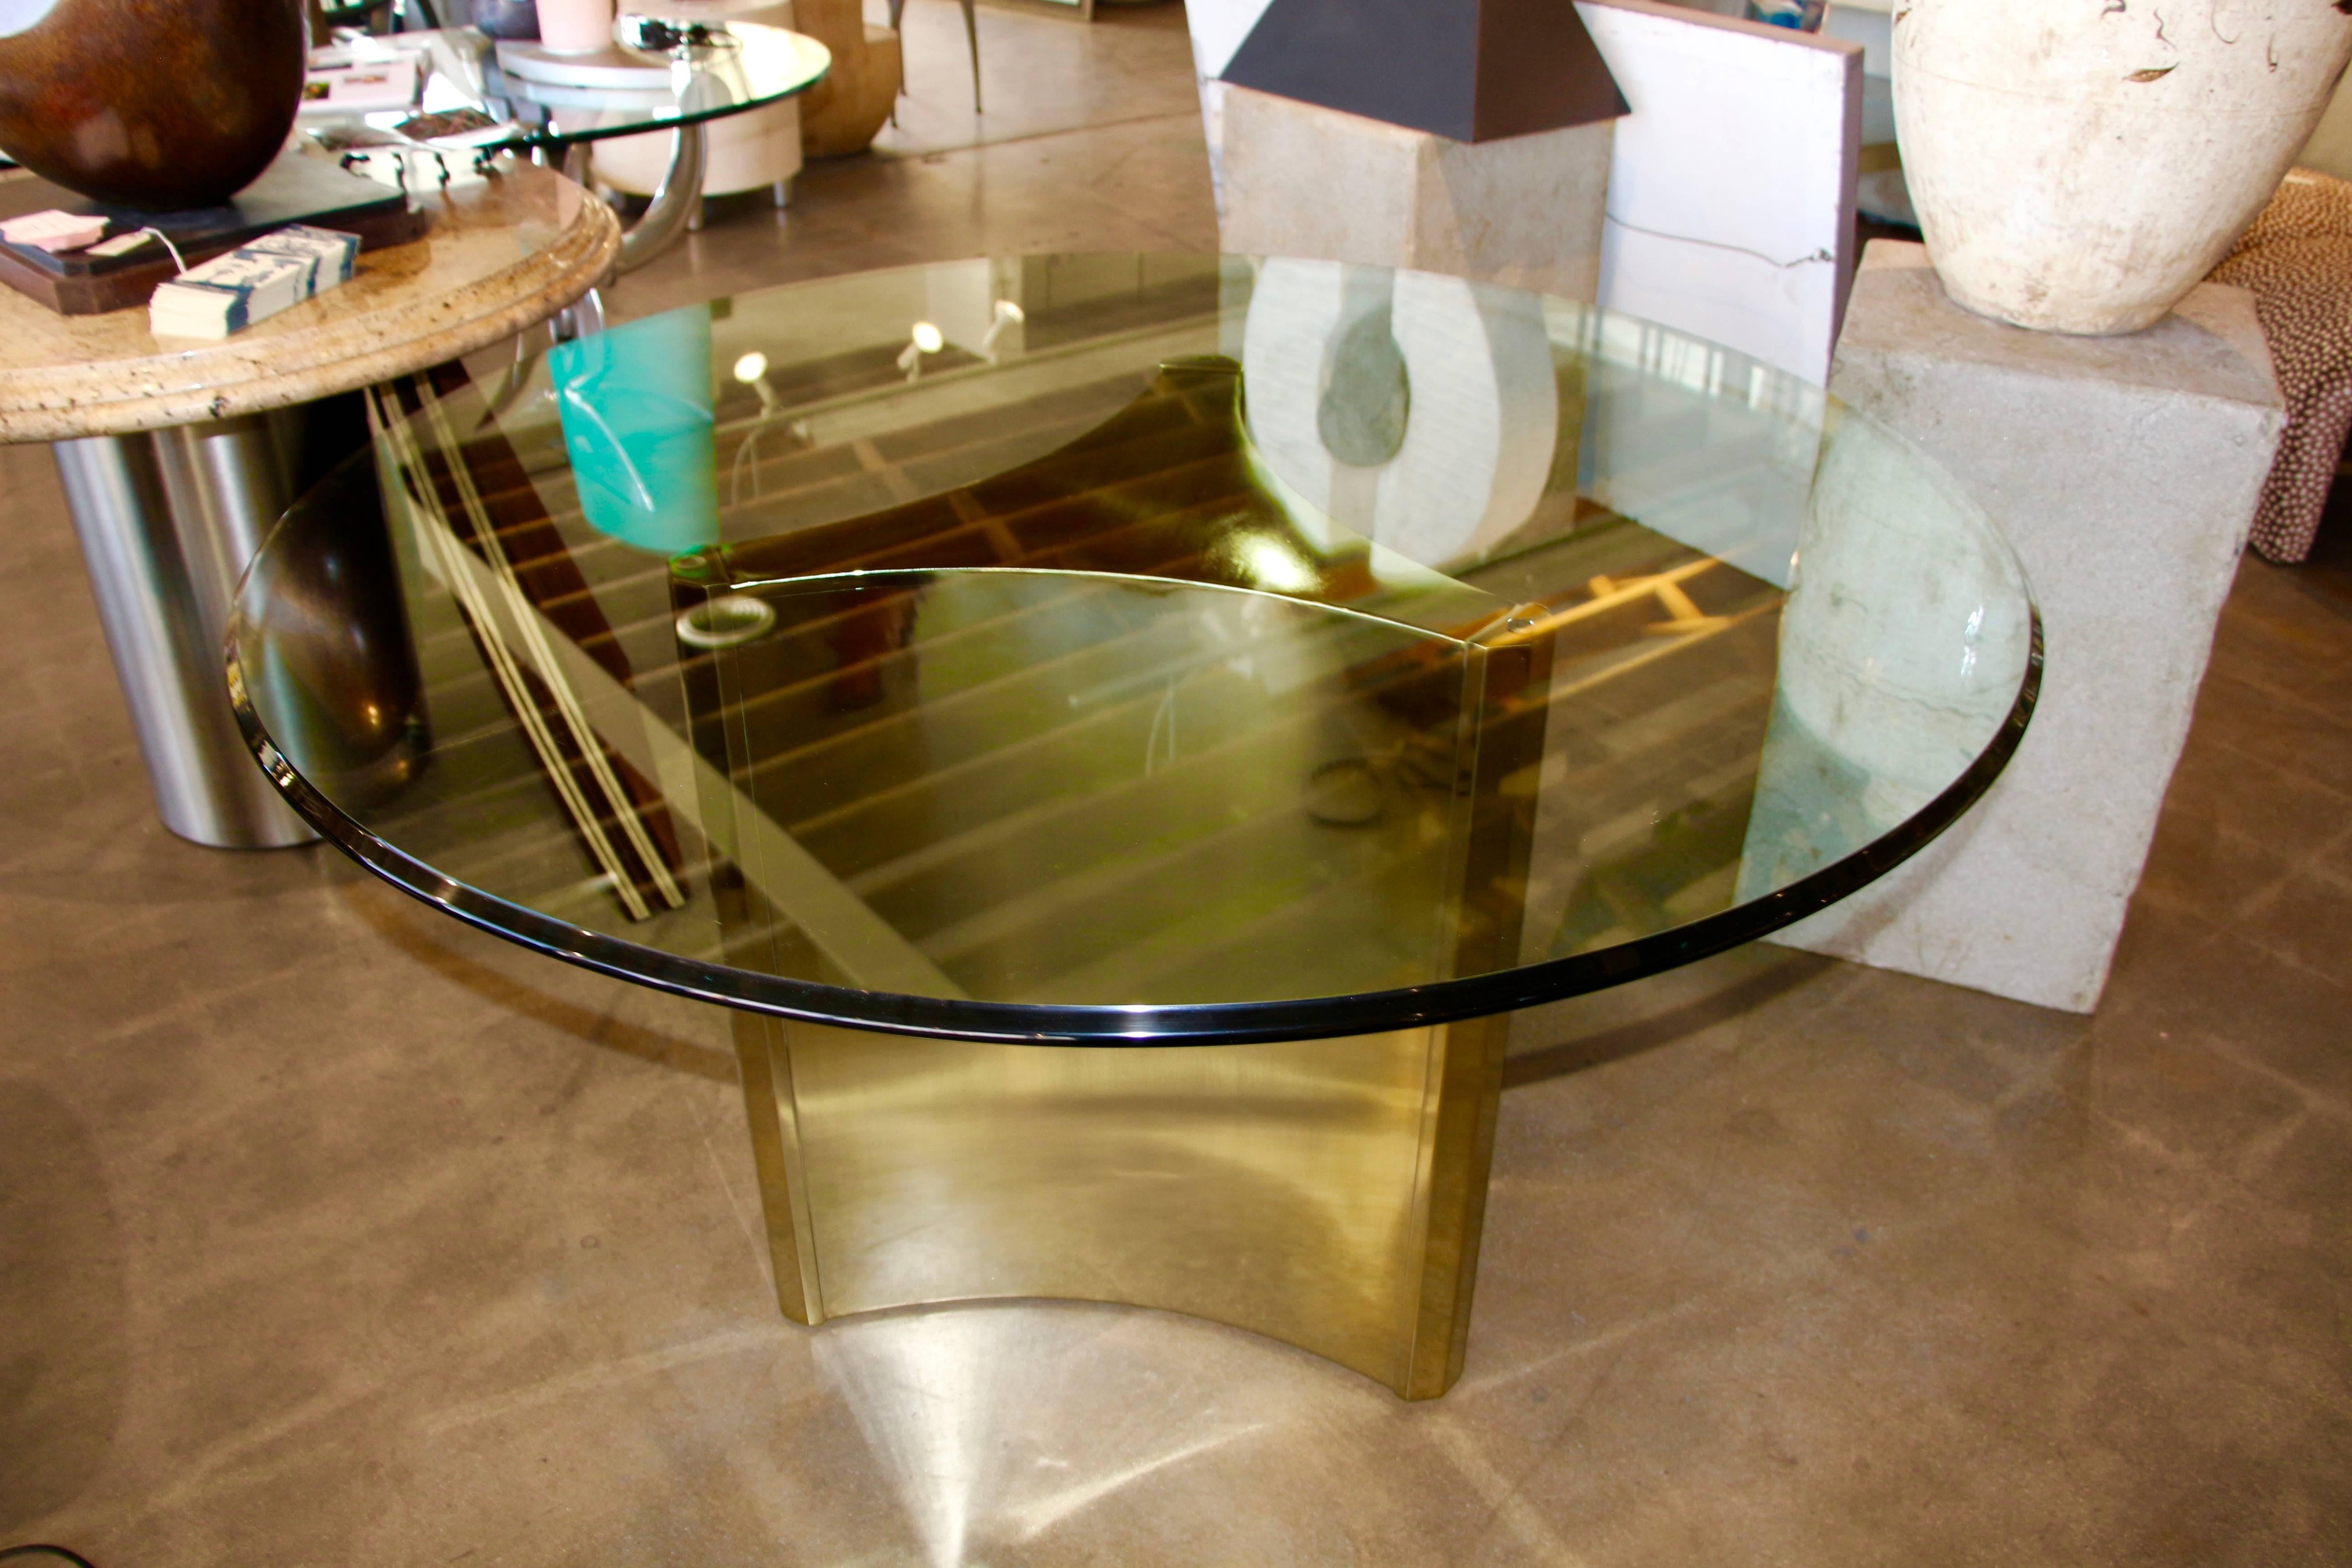 A nice Mastercraft brass table base with a bevelled edge glass top. The table is in good condition with some minor scratches and marks to the brass and some minor surface scratches to the glass. The rubber or plastic pieces look replaced.